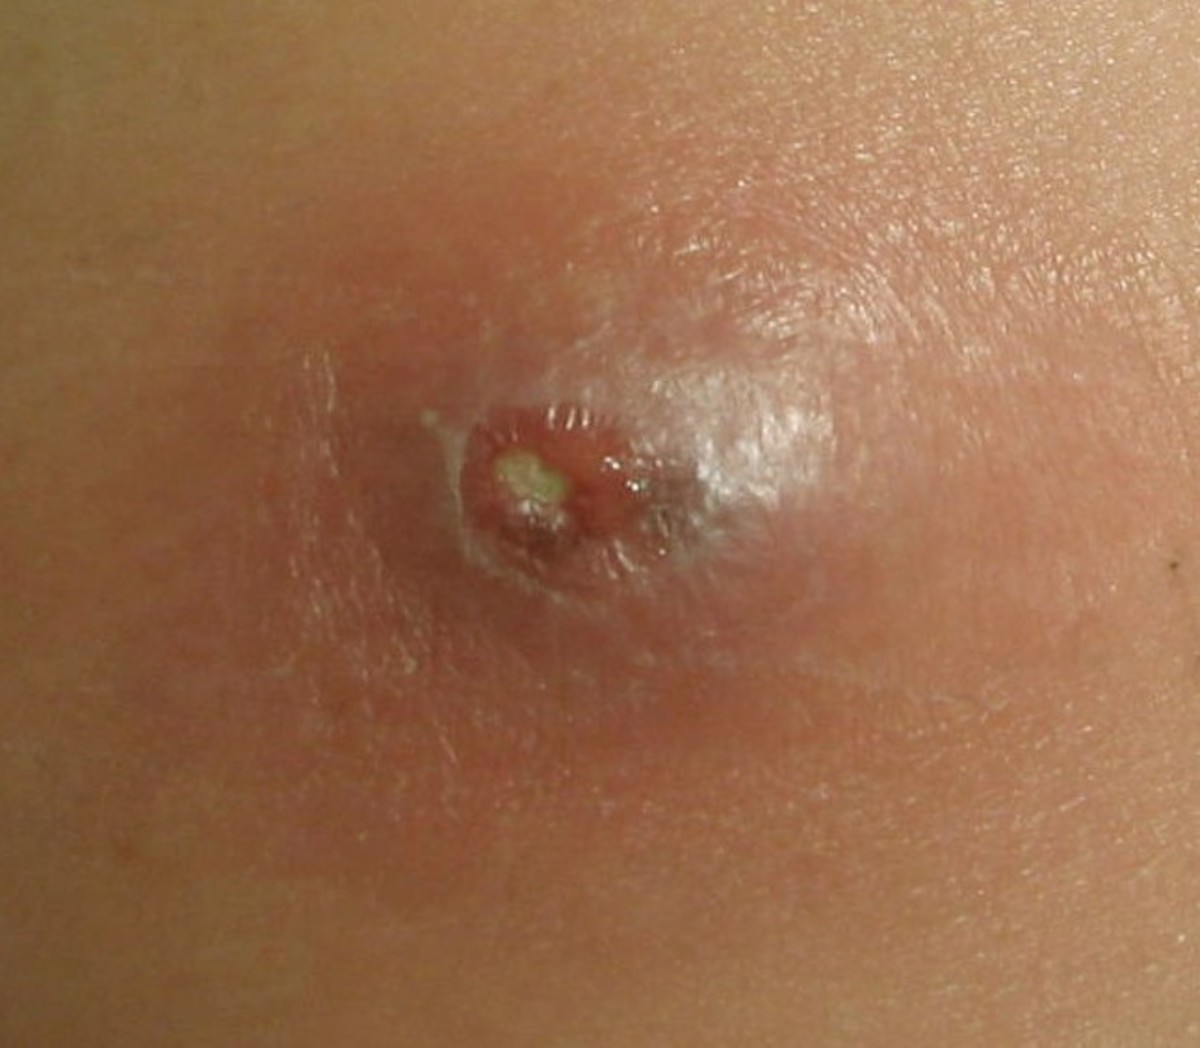 spider-bites-pictures-symptoms-and-treatment